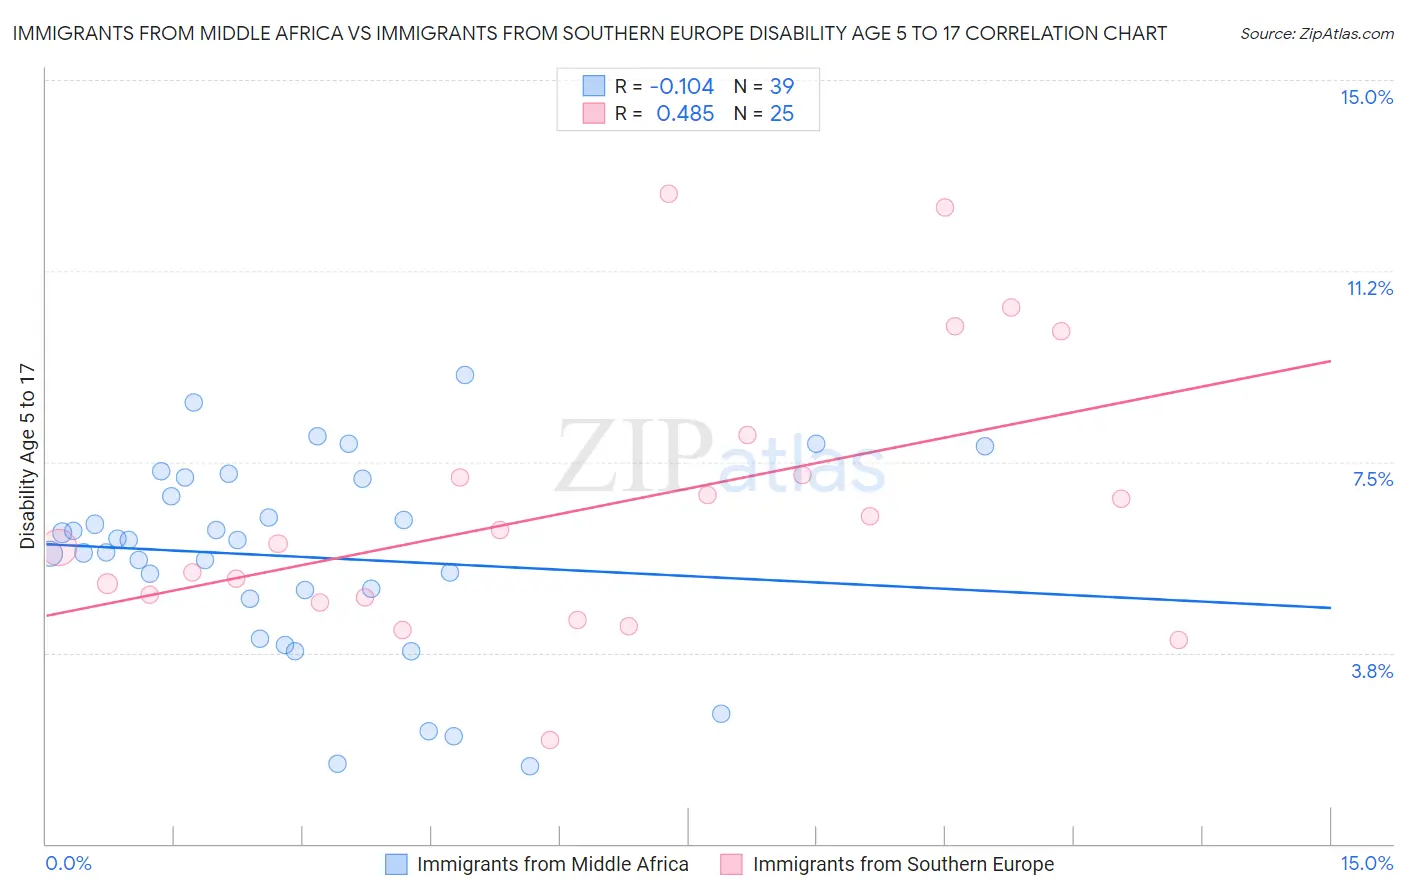 Immigrants from Middle Africa vs Immigrants from Southern Europe Disability Age 5 to 17